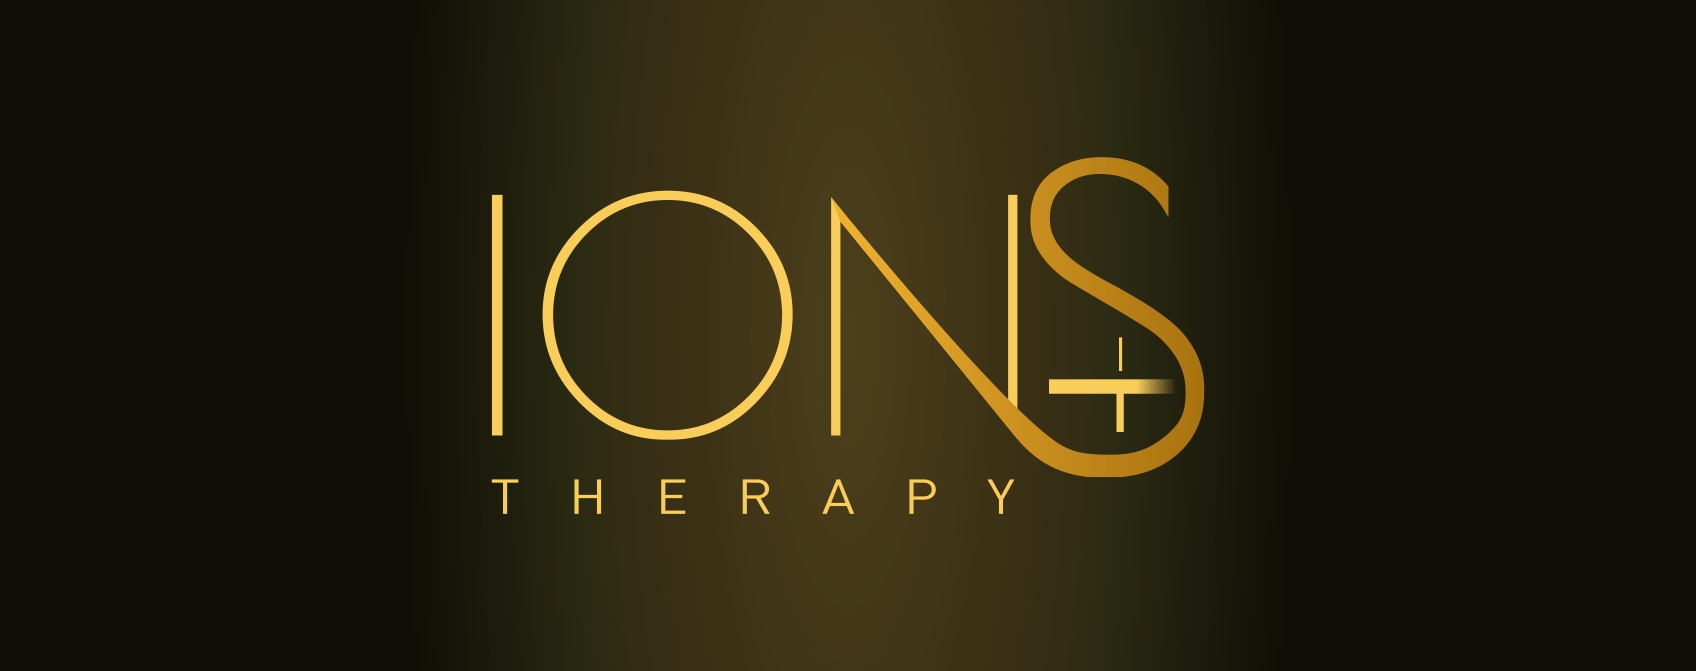 IONS Power Therapy